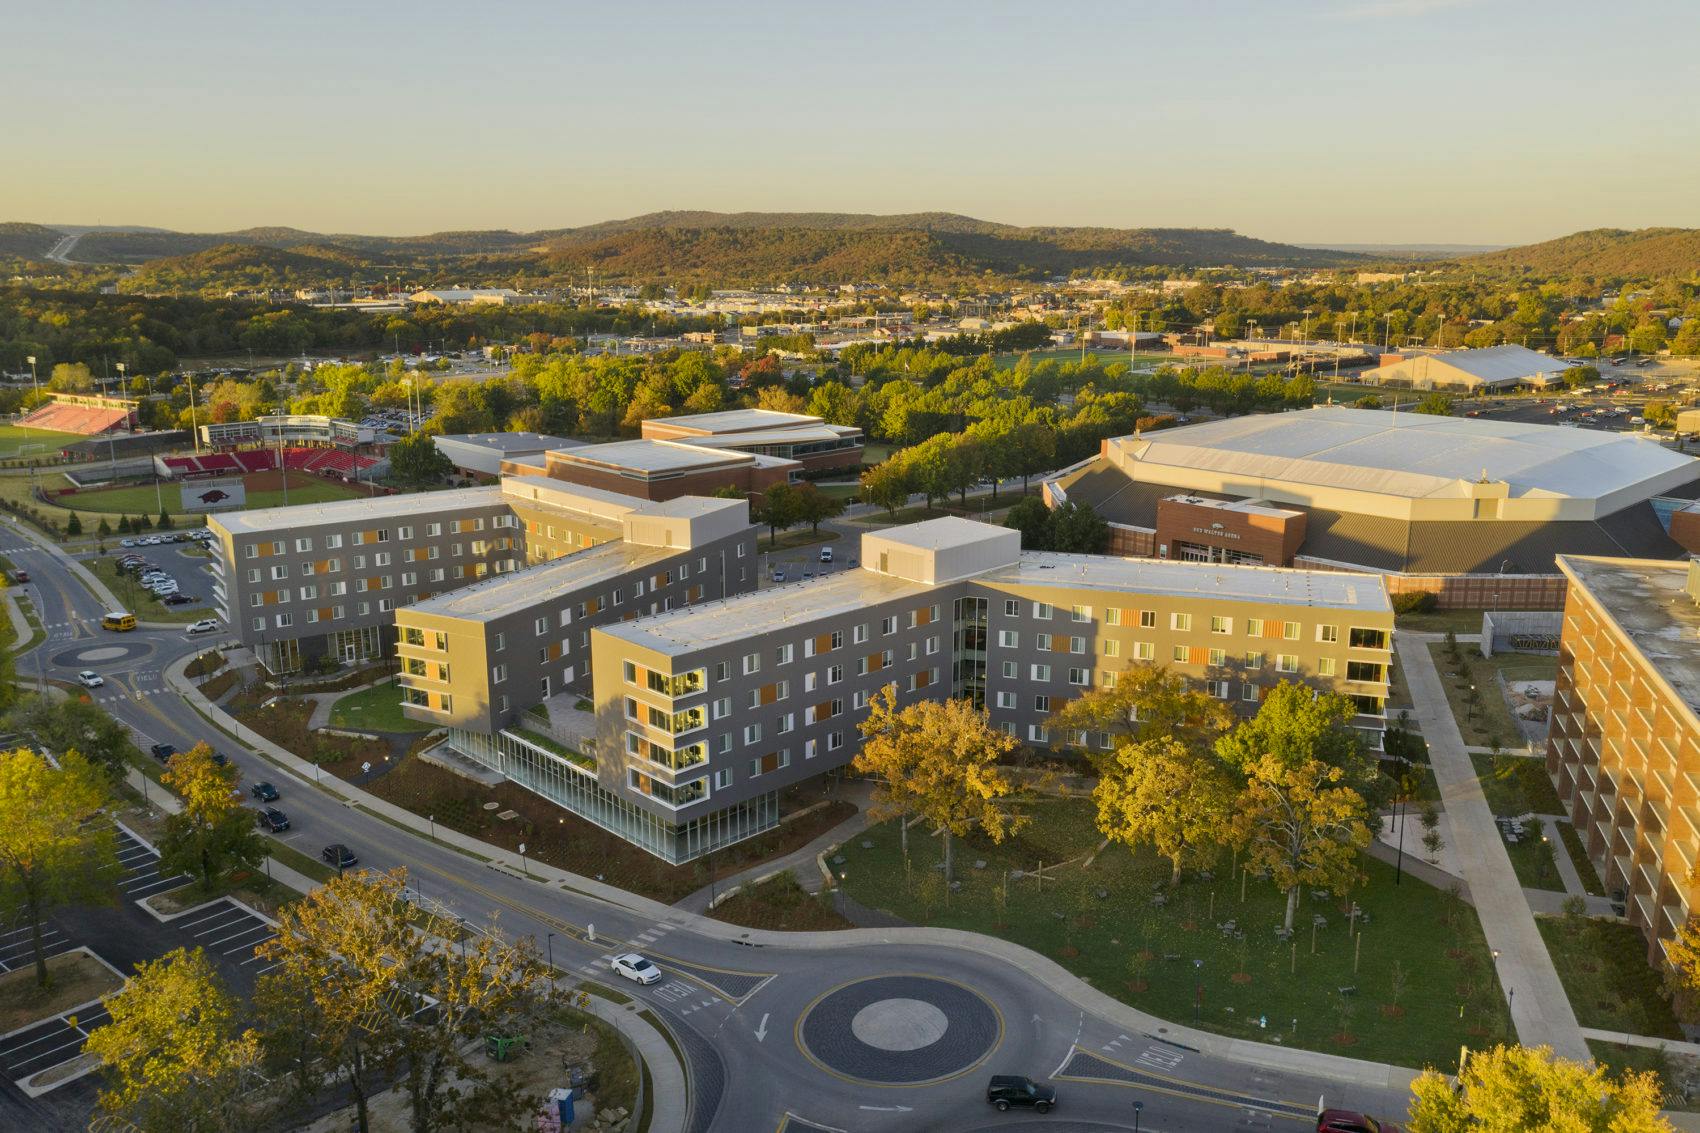 University of Arkansas debuts the largest mass timber building in the U